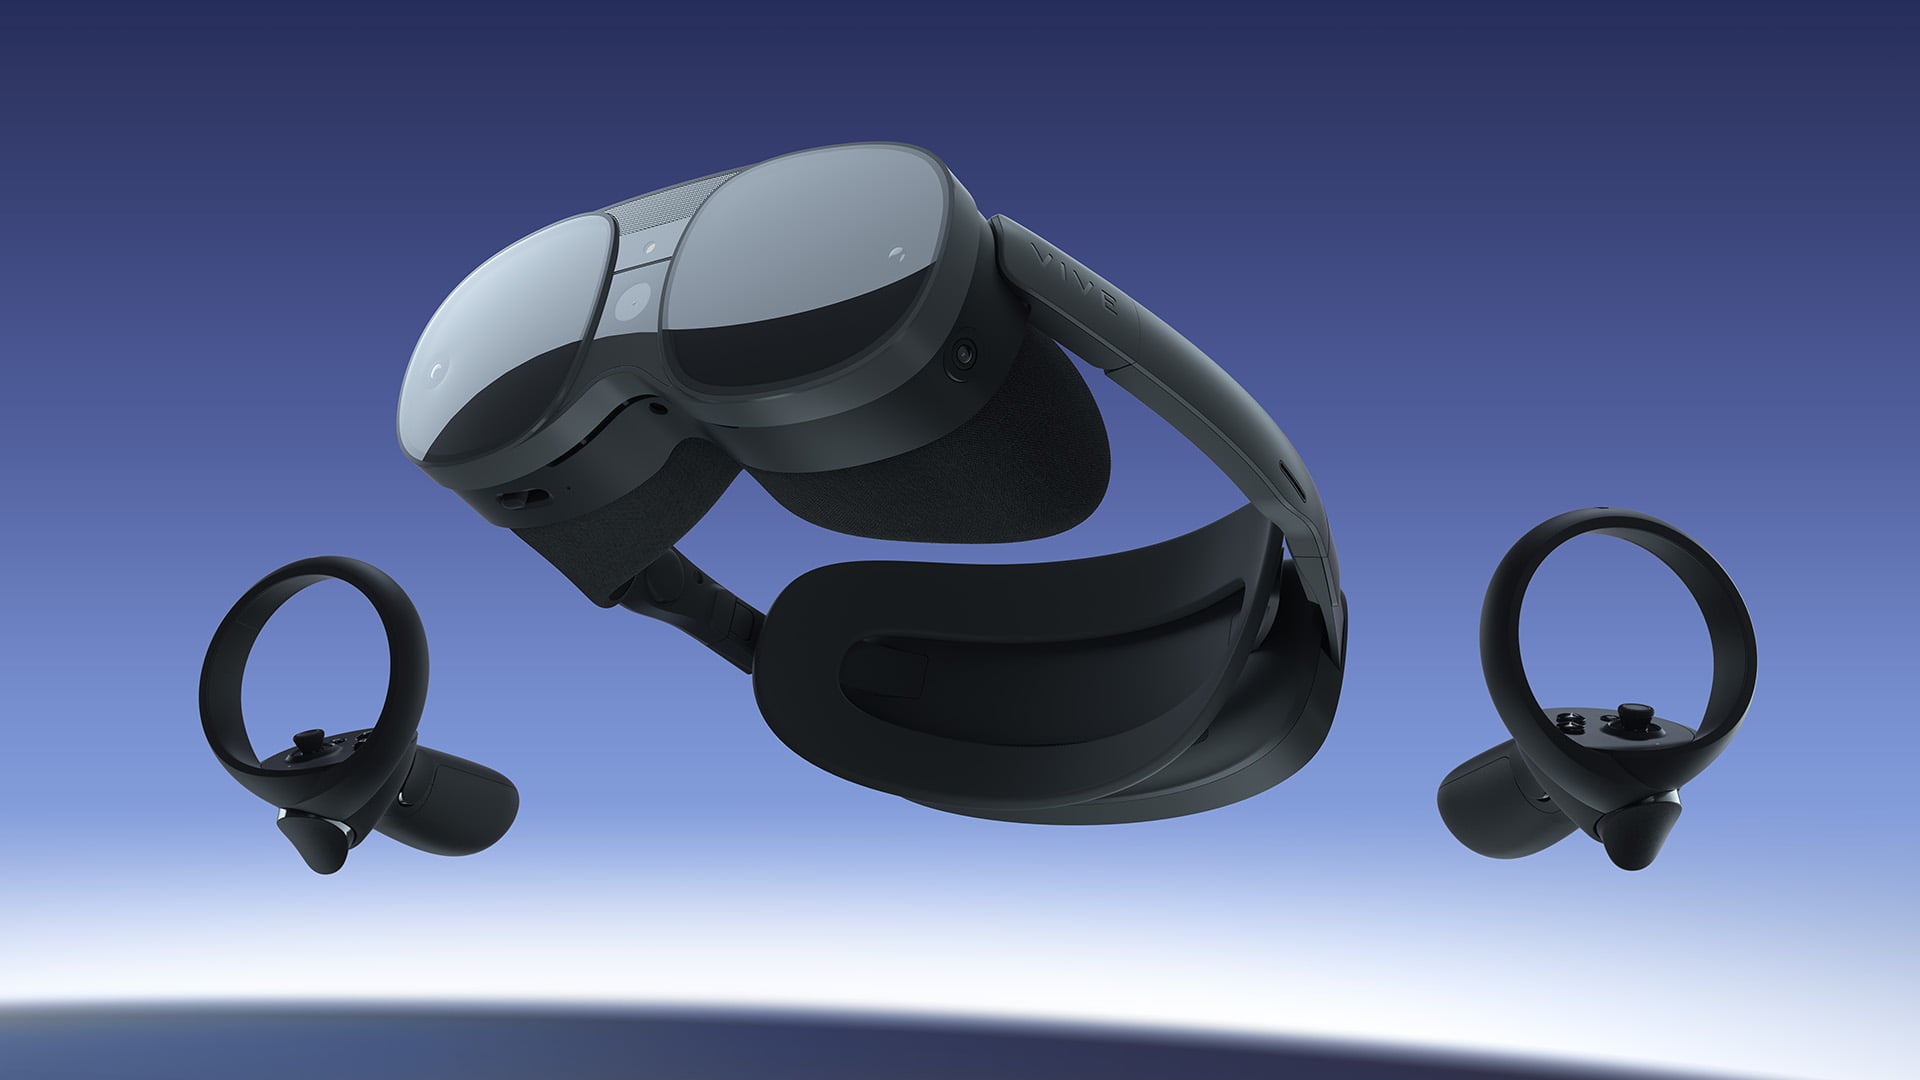 Vive XR Elite: This is HTC's new mixed reality headset